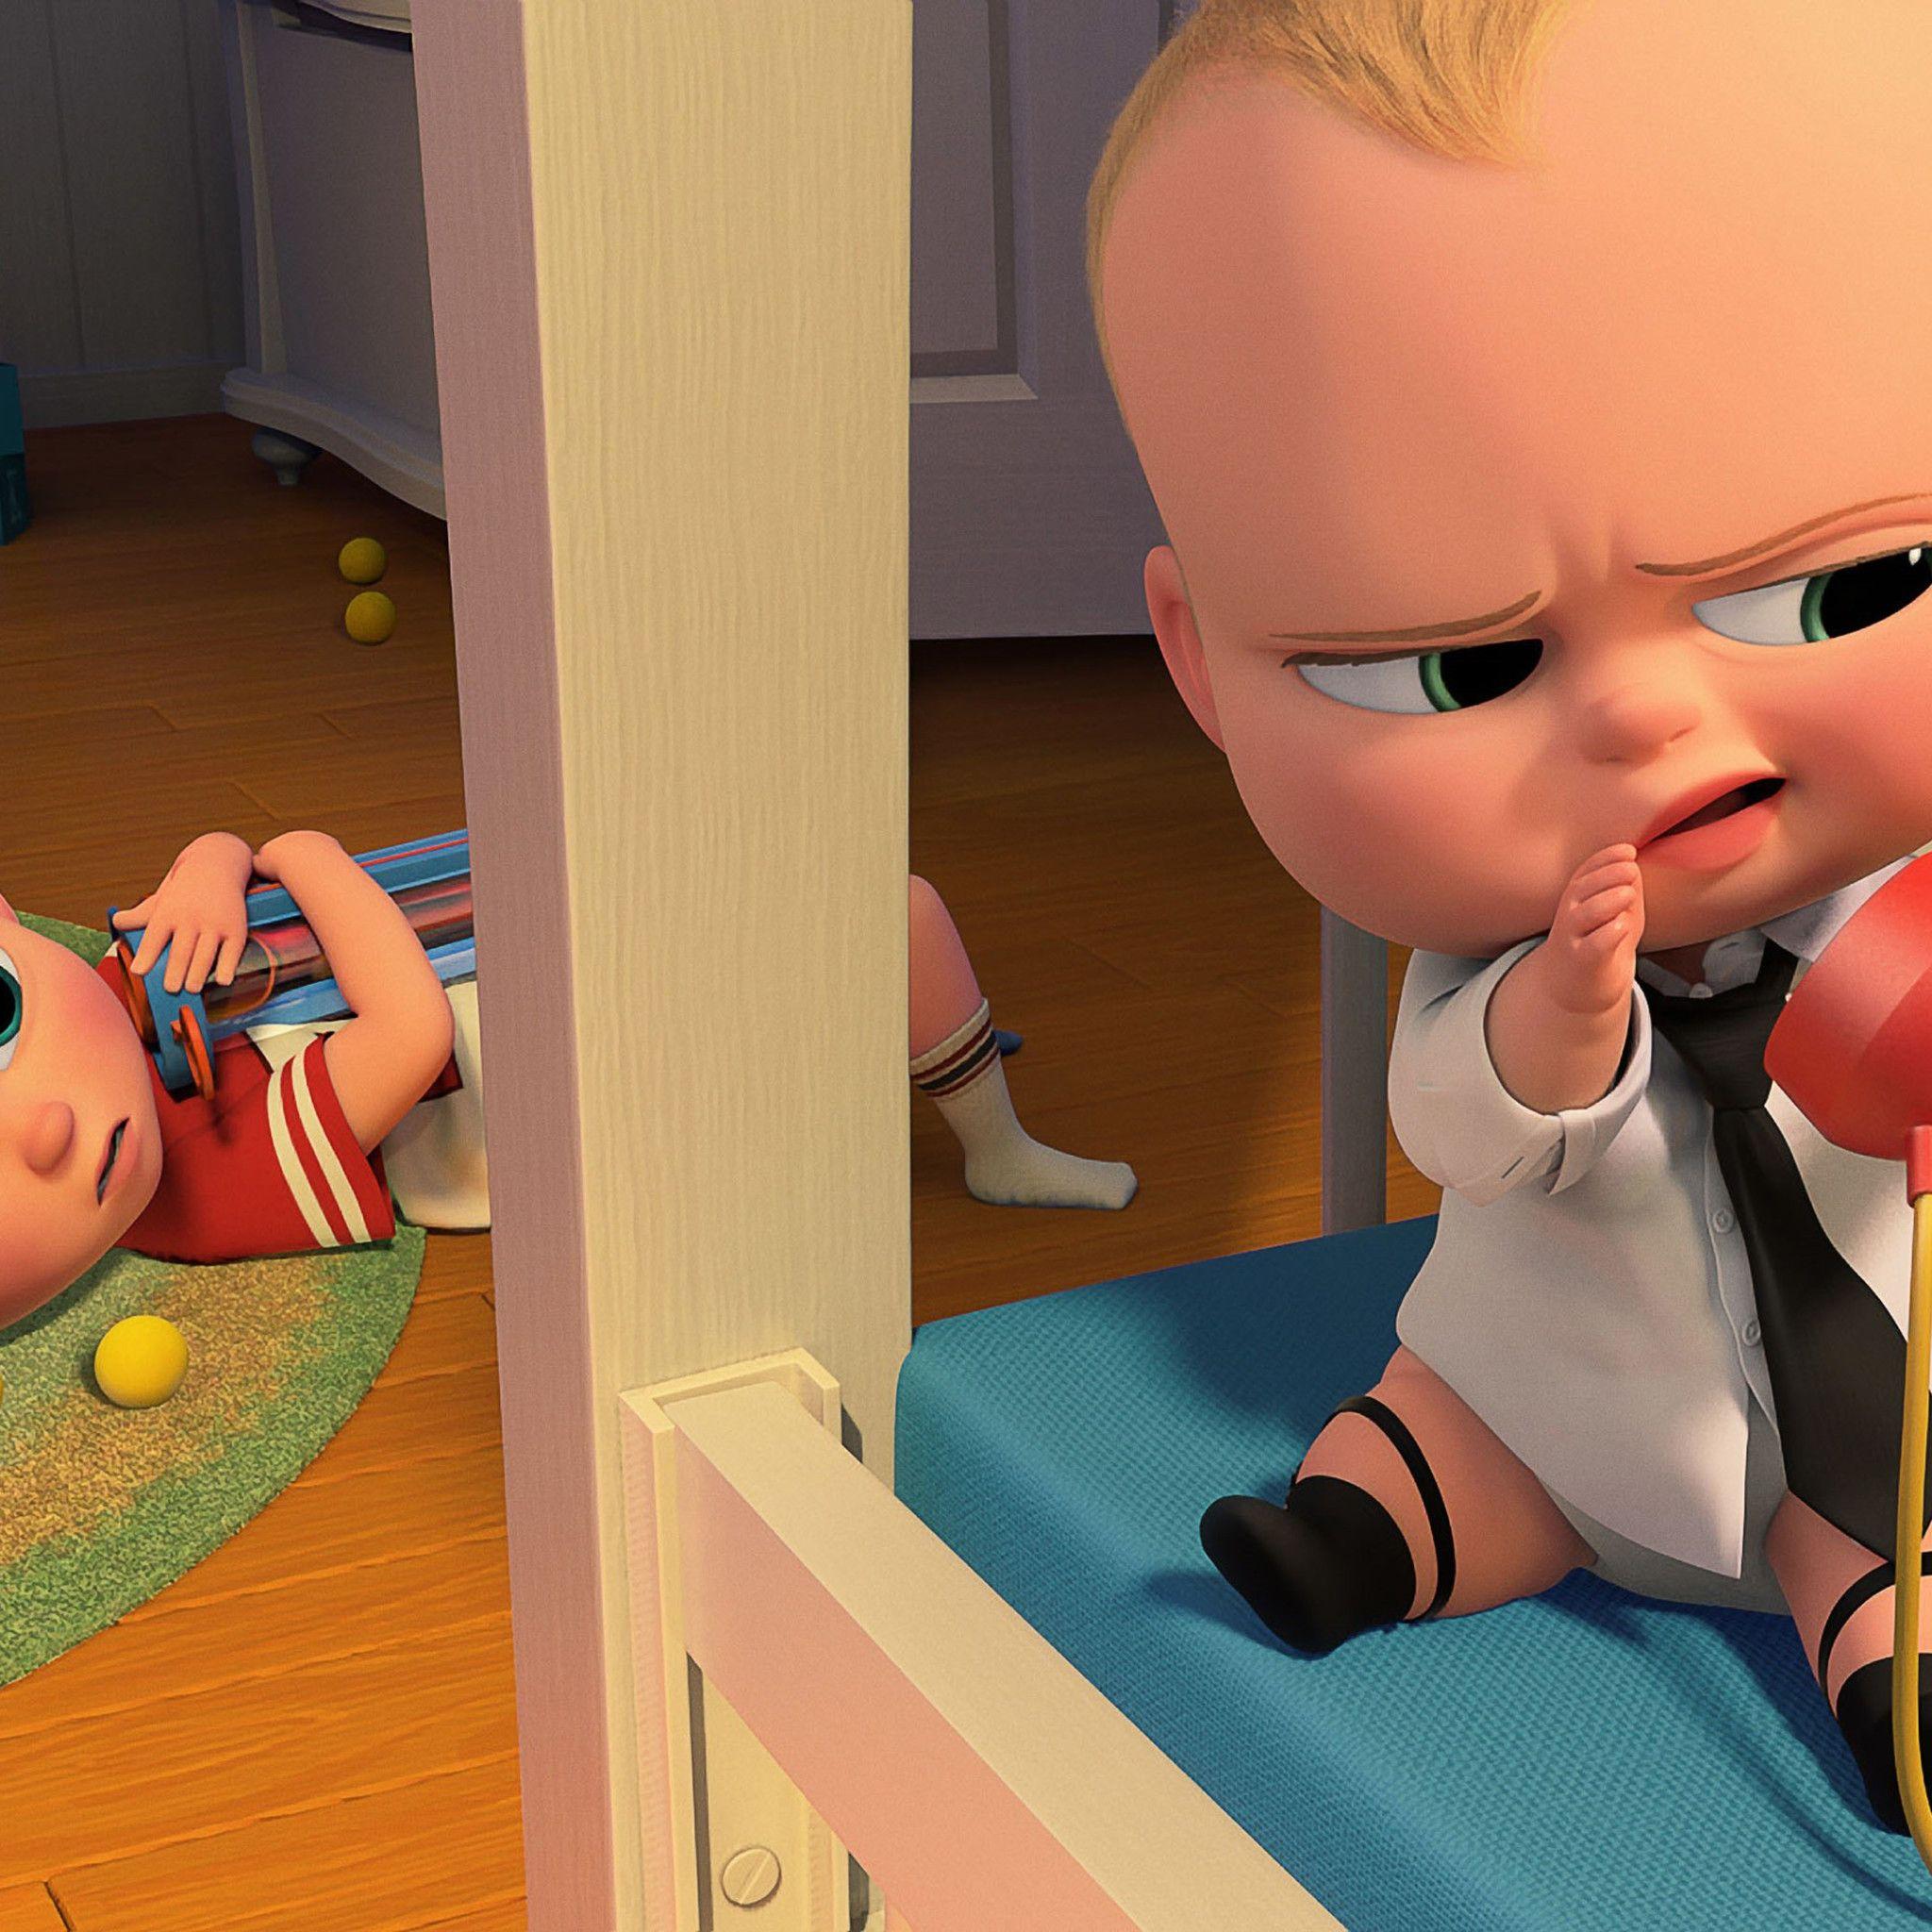 The Boss Baby Wallpapers - Top Free The Boss Baby ...